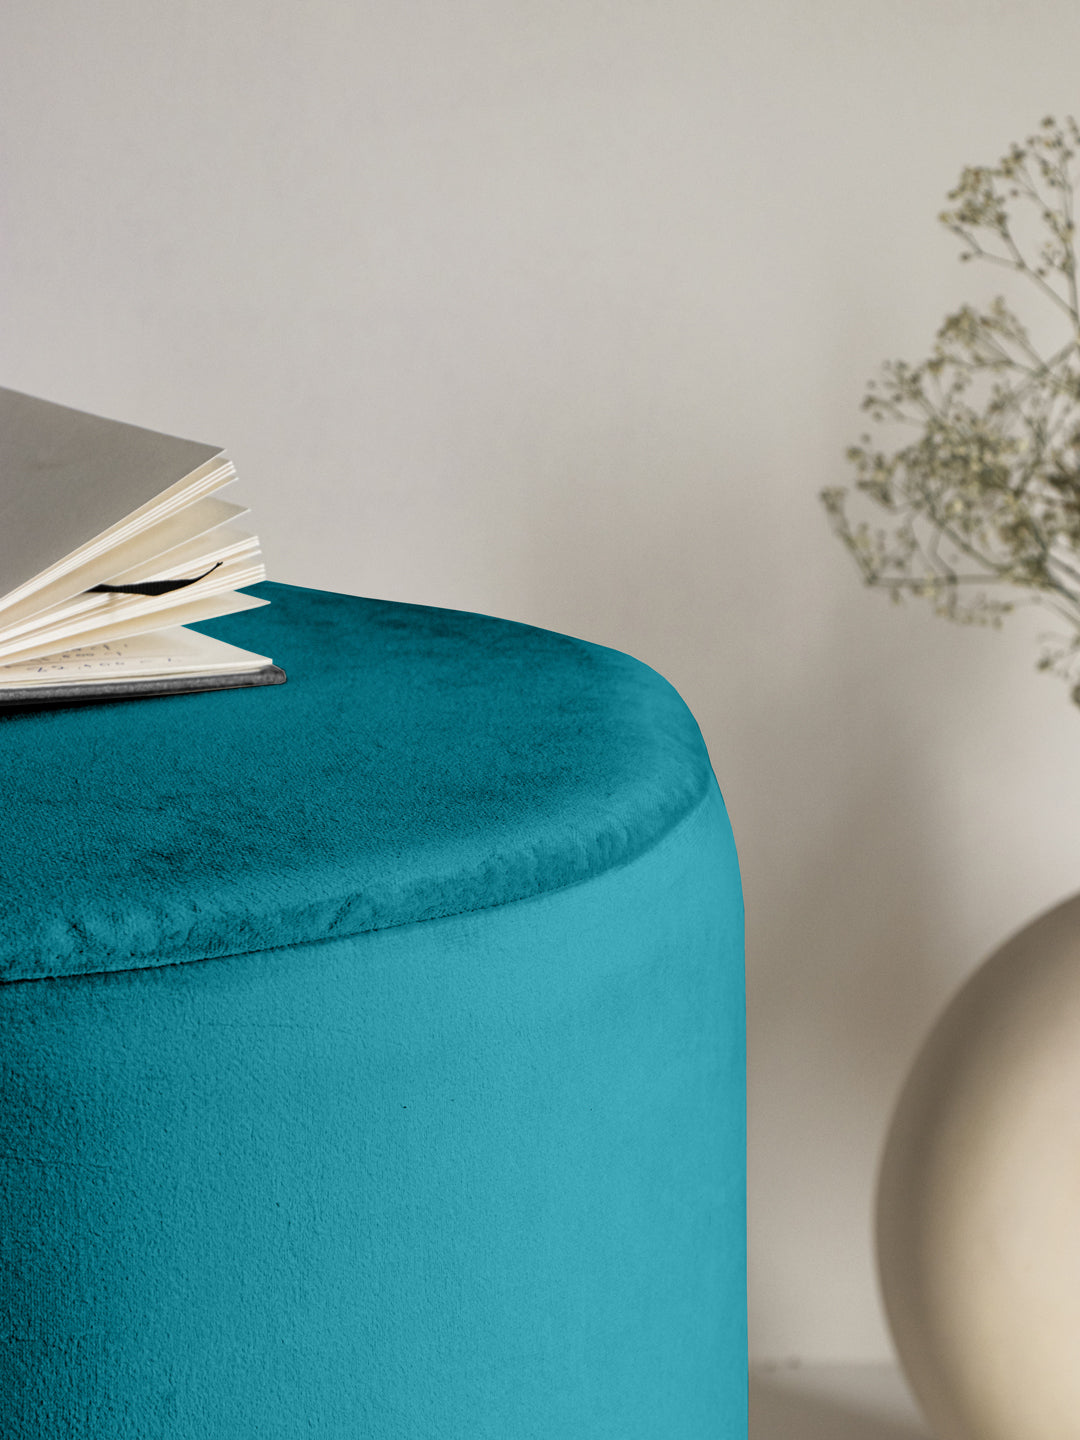 Suede Teal Blue Stool With Gold Rings